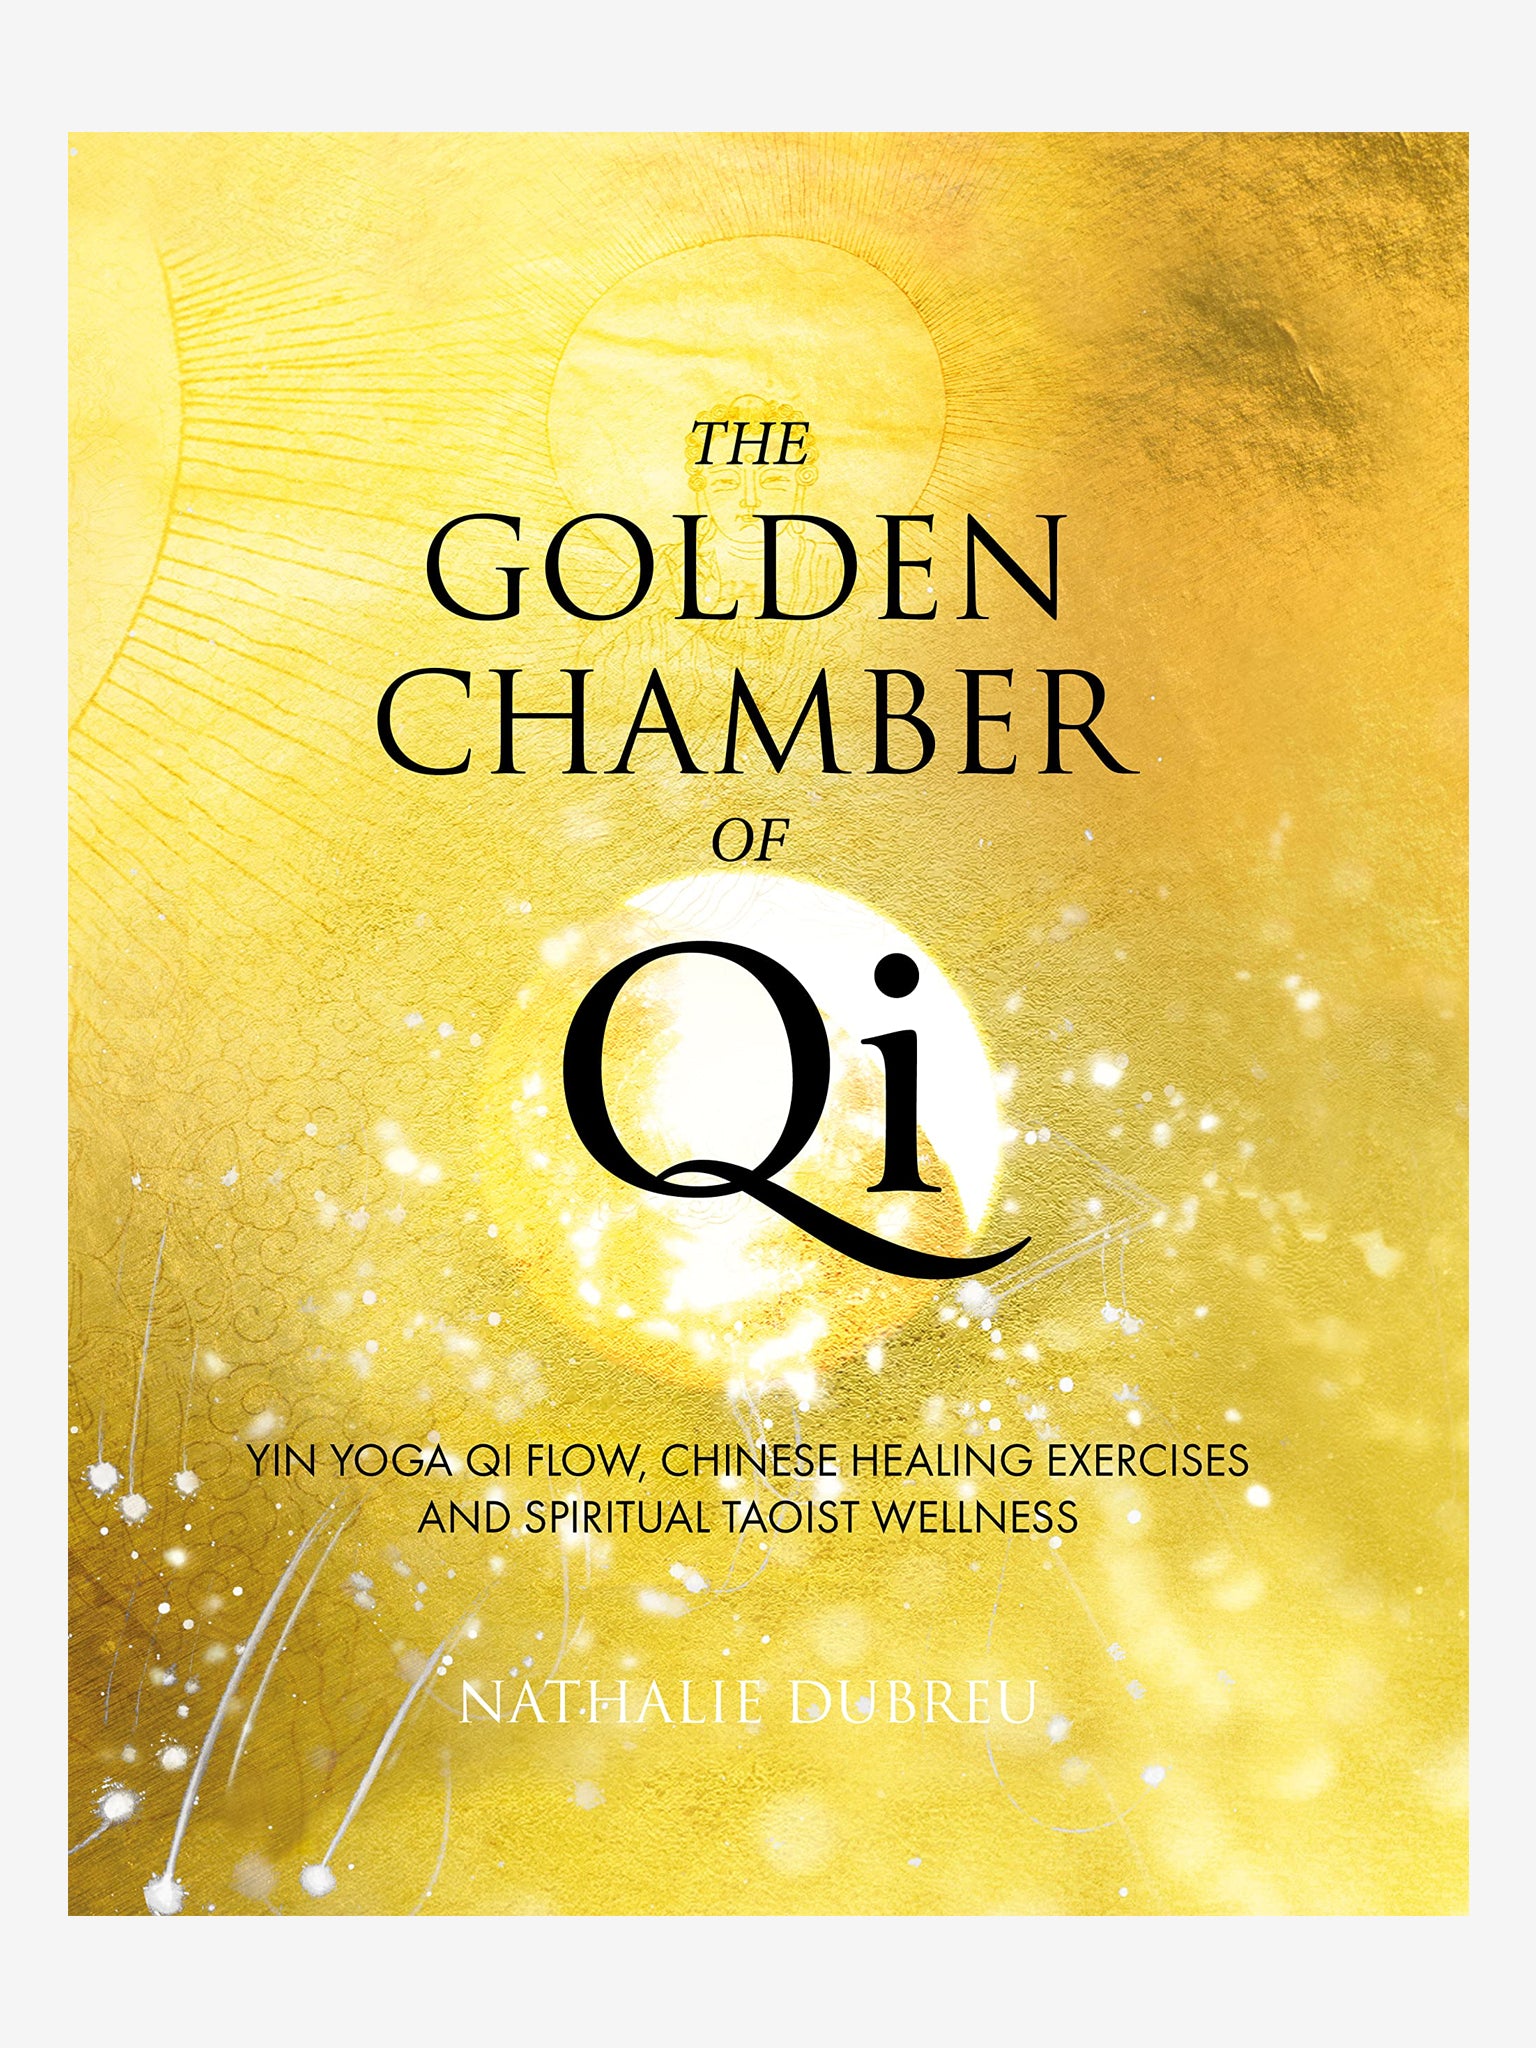 The Golden Chamber of Qi